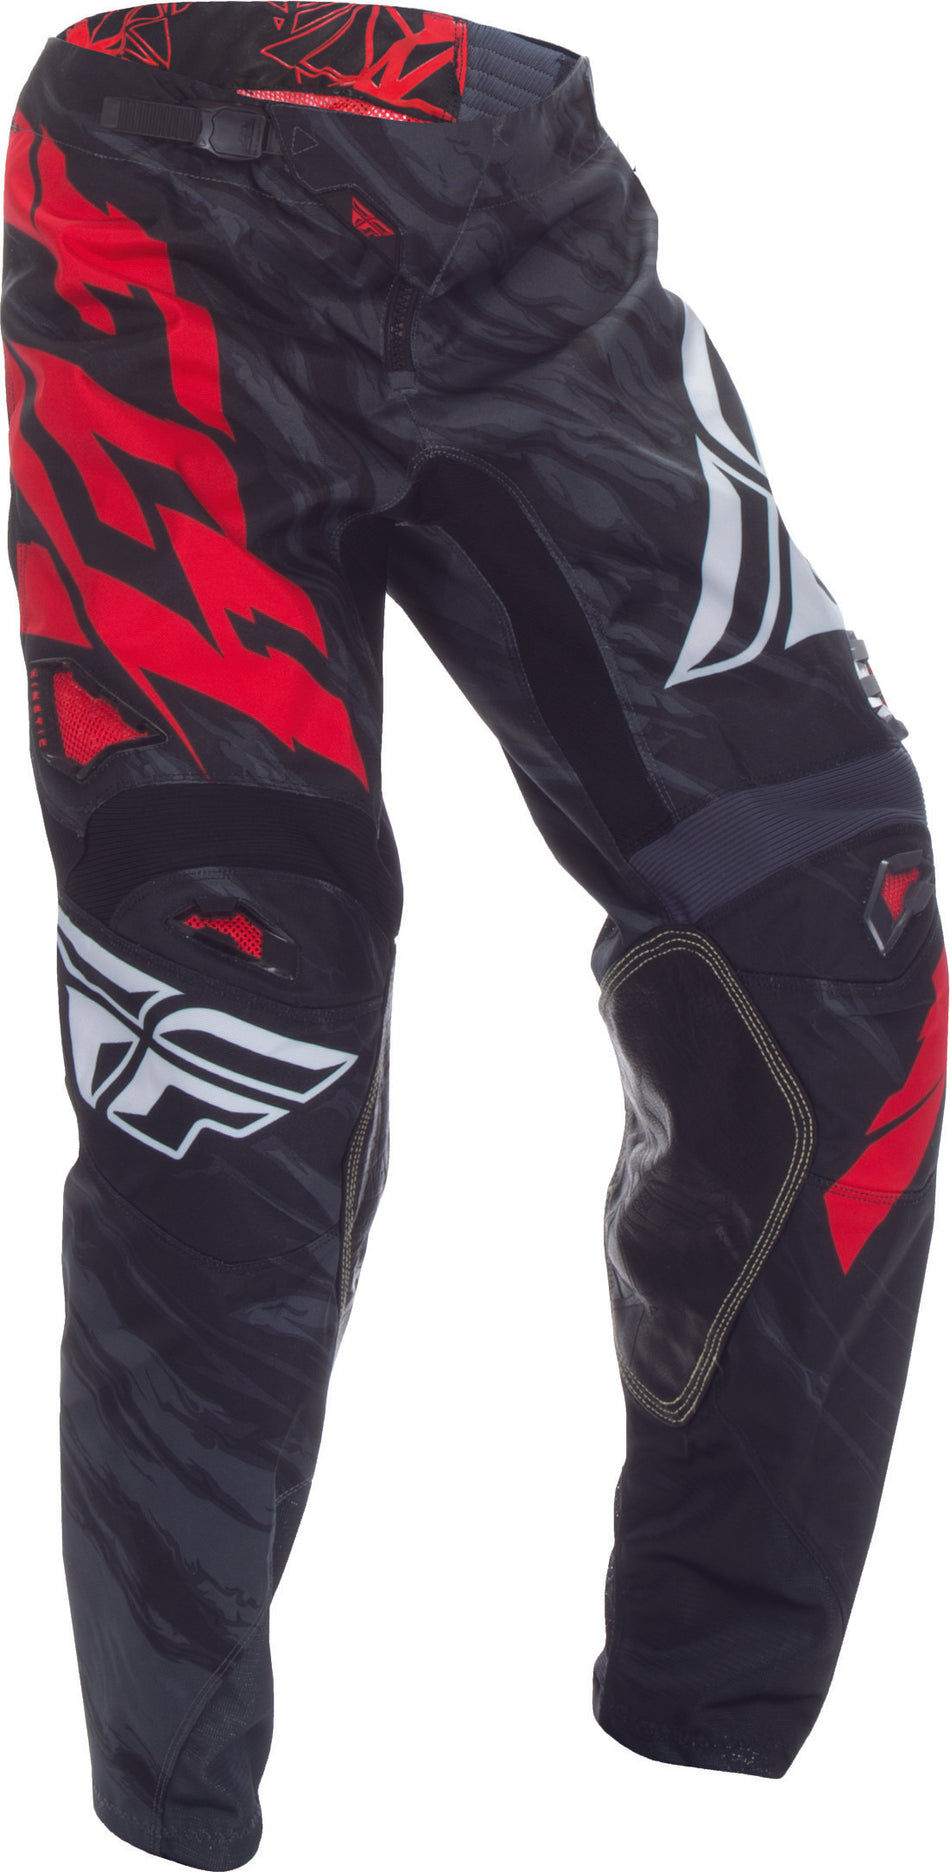 FLY RACING Kinetic Relapse Pant Black/Red Sz 28 370-43028